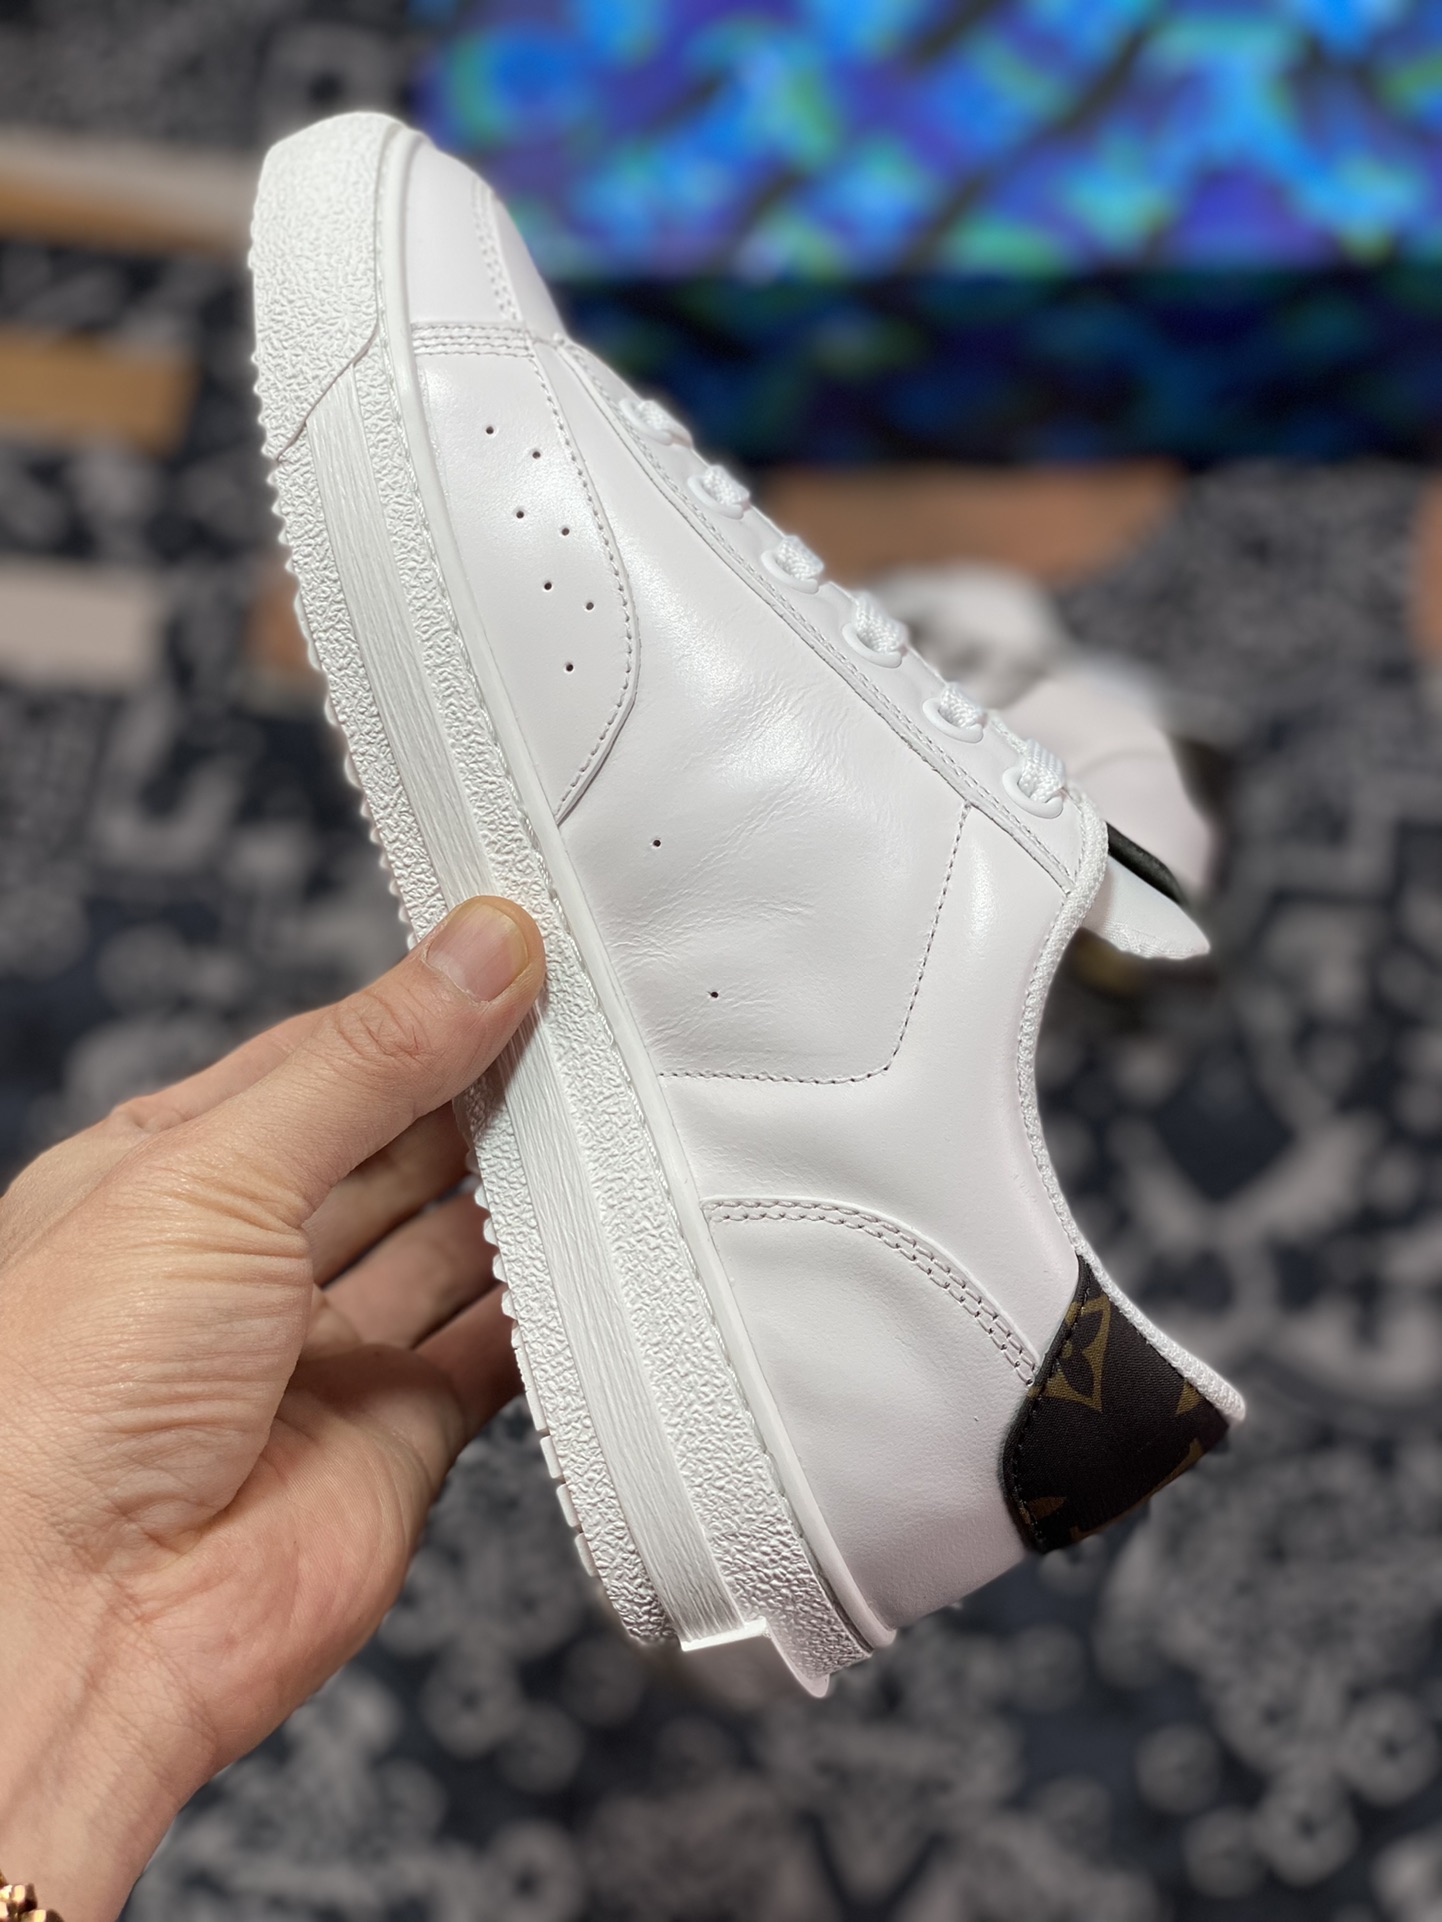 LV has shipped high-end customized shoe uppers imported from Italy with diamond pattern calfskin and nappa pattern calfskin